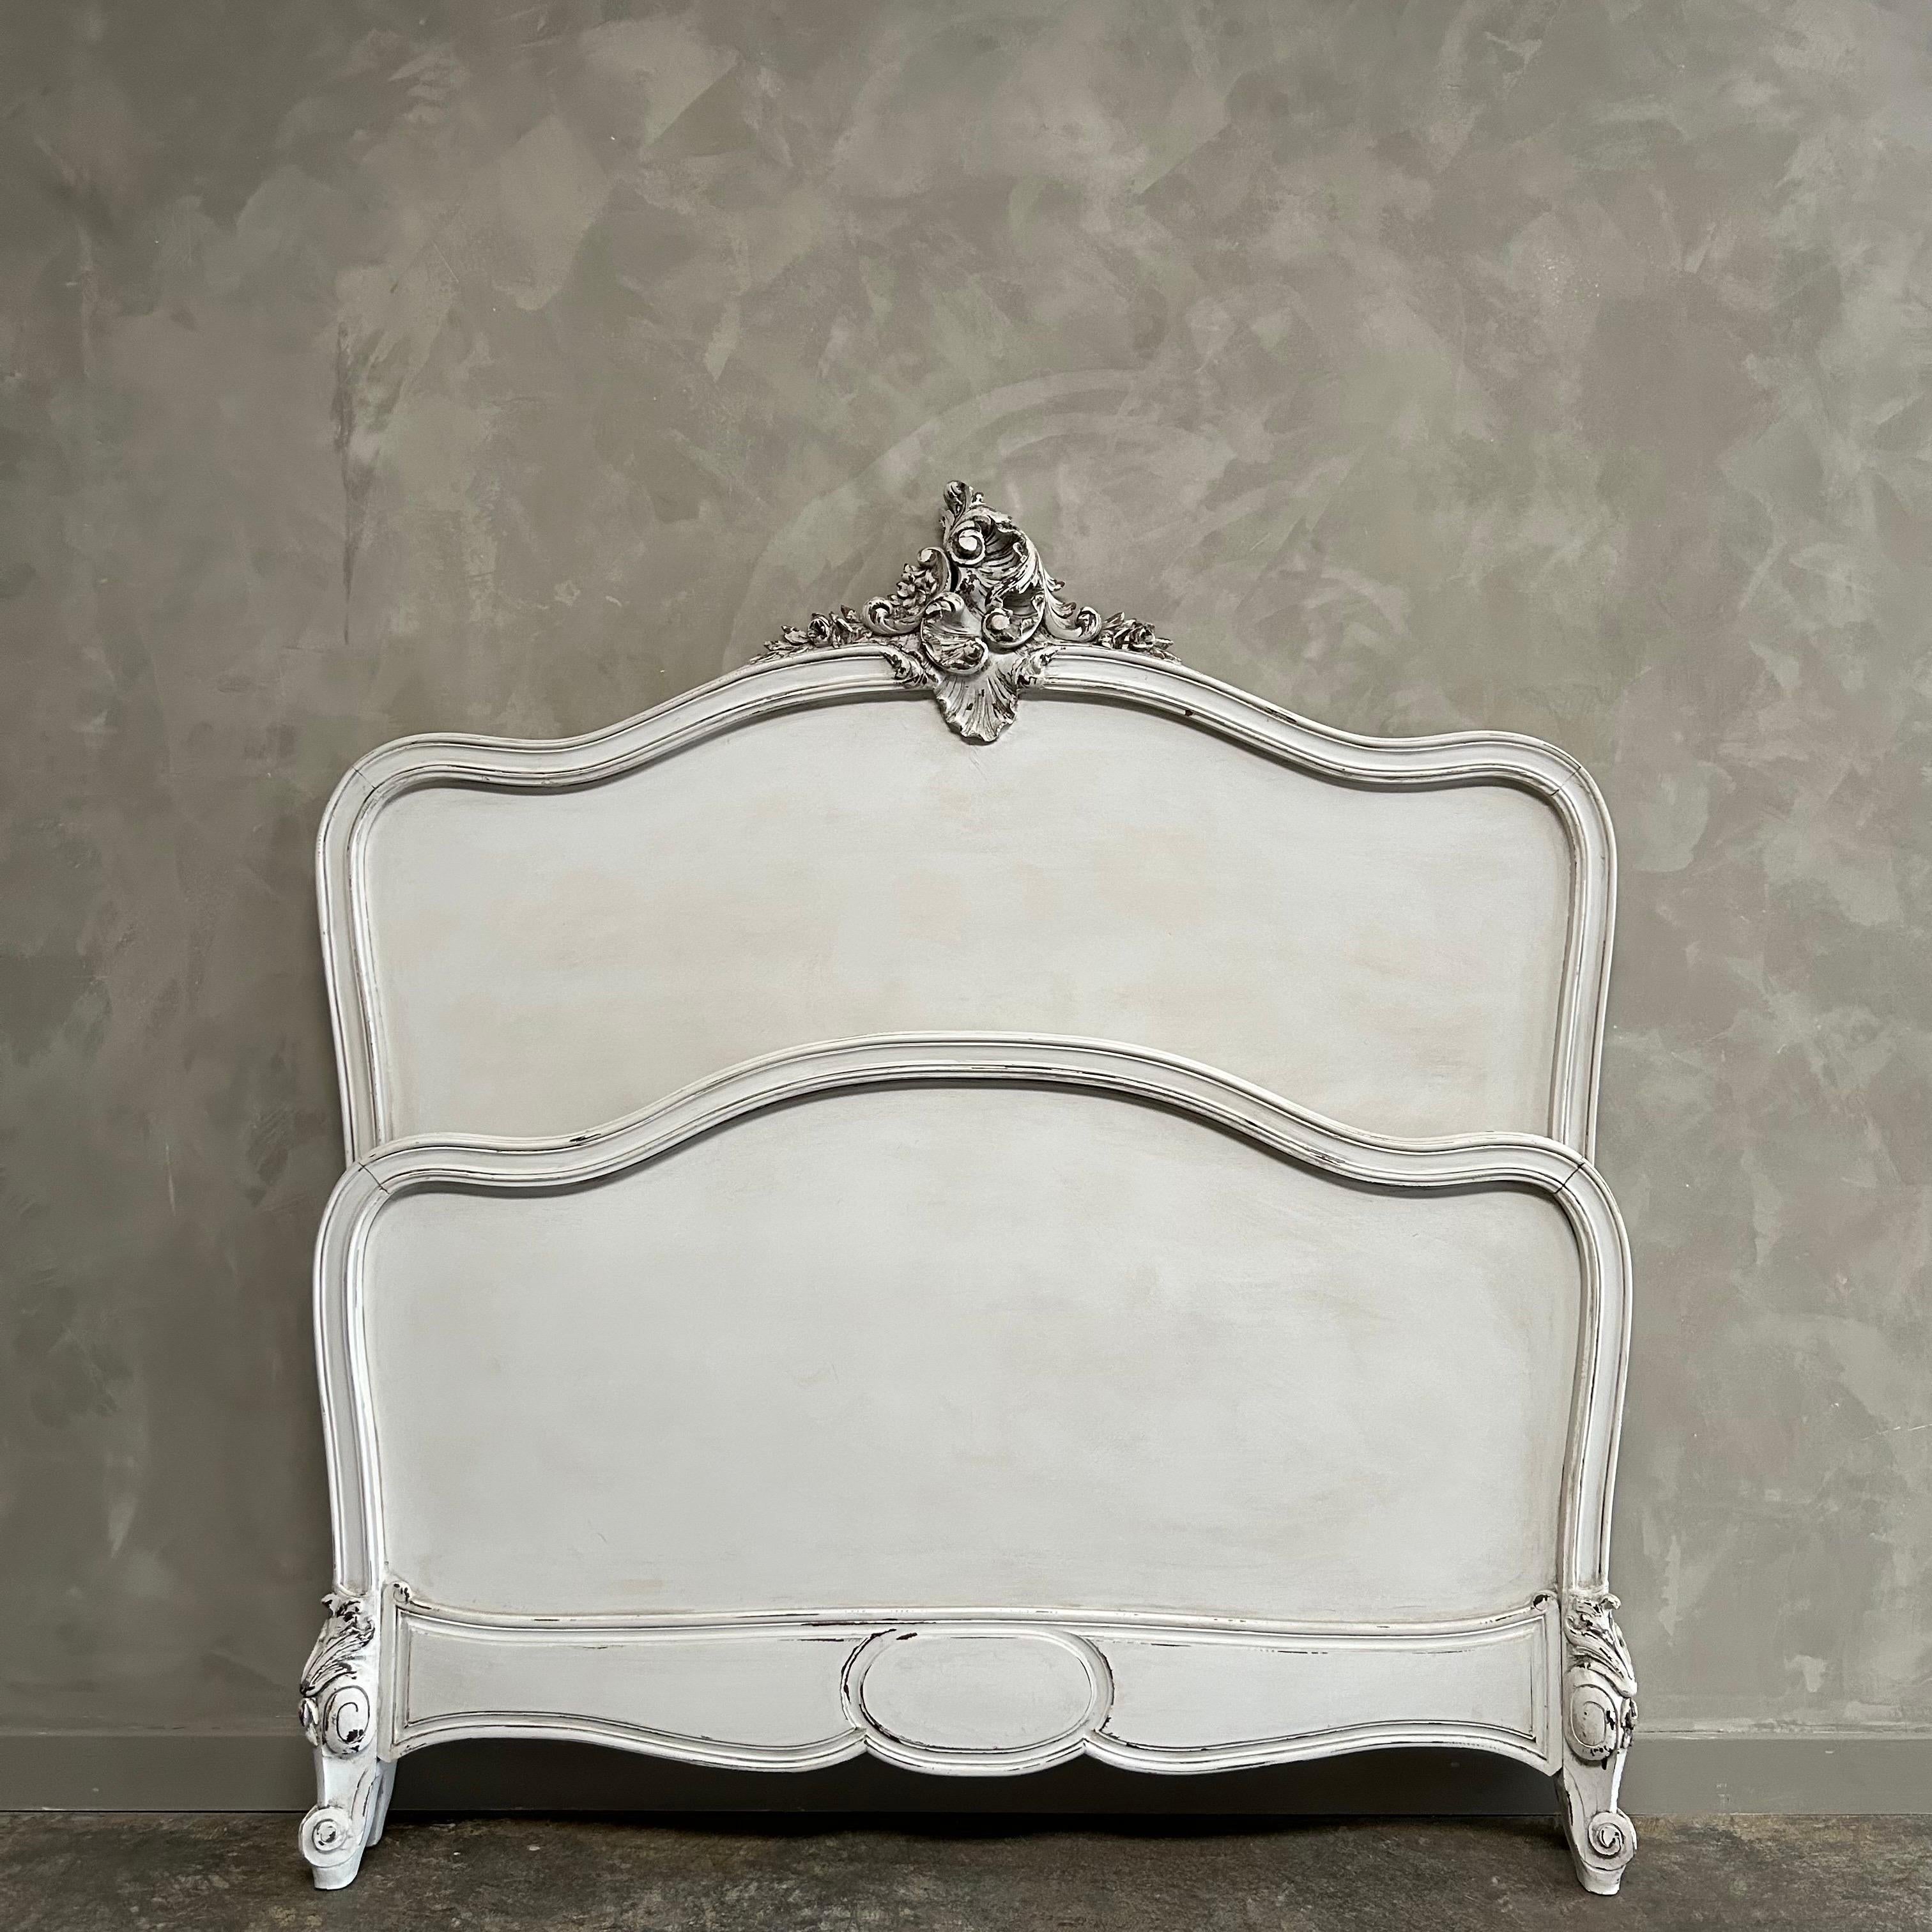 Welcome to bloomhomeinc we stock over 2000 items, please scroll down and click view sellers other items to see more!

Antique French bed in oyster white painted finish, subtle distressed edges, and antique glazed patina.
Size: 58”w x 80”d x